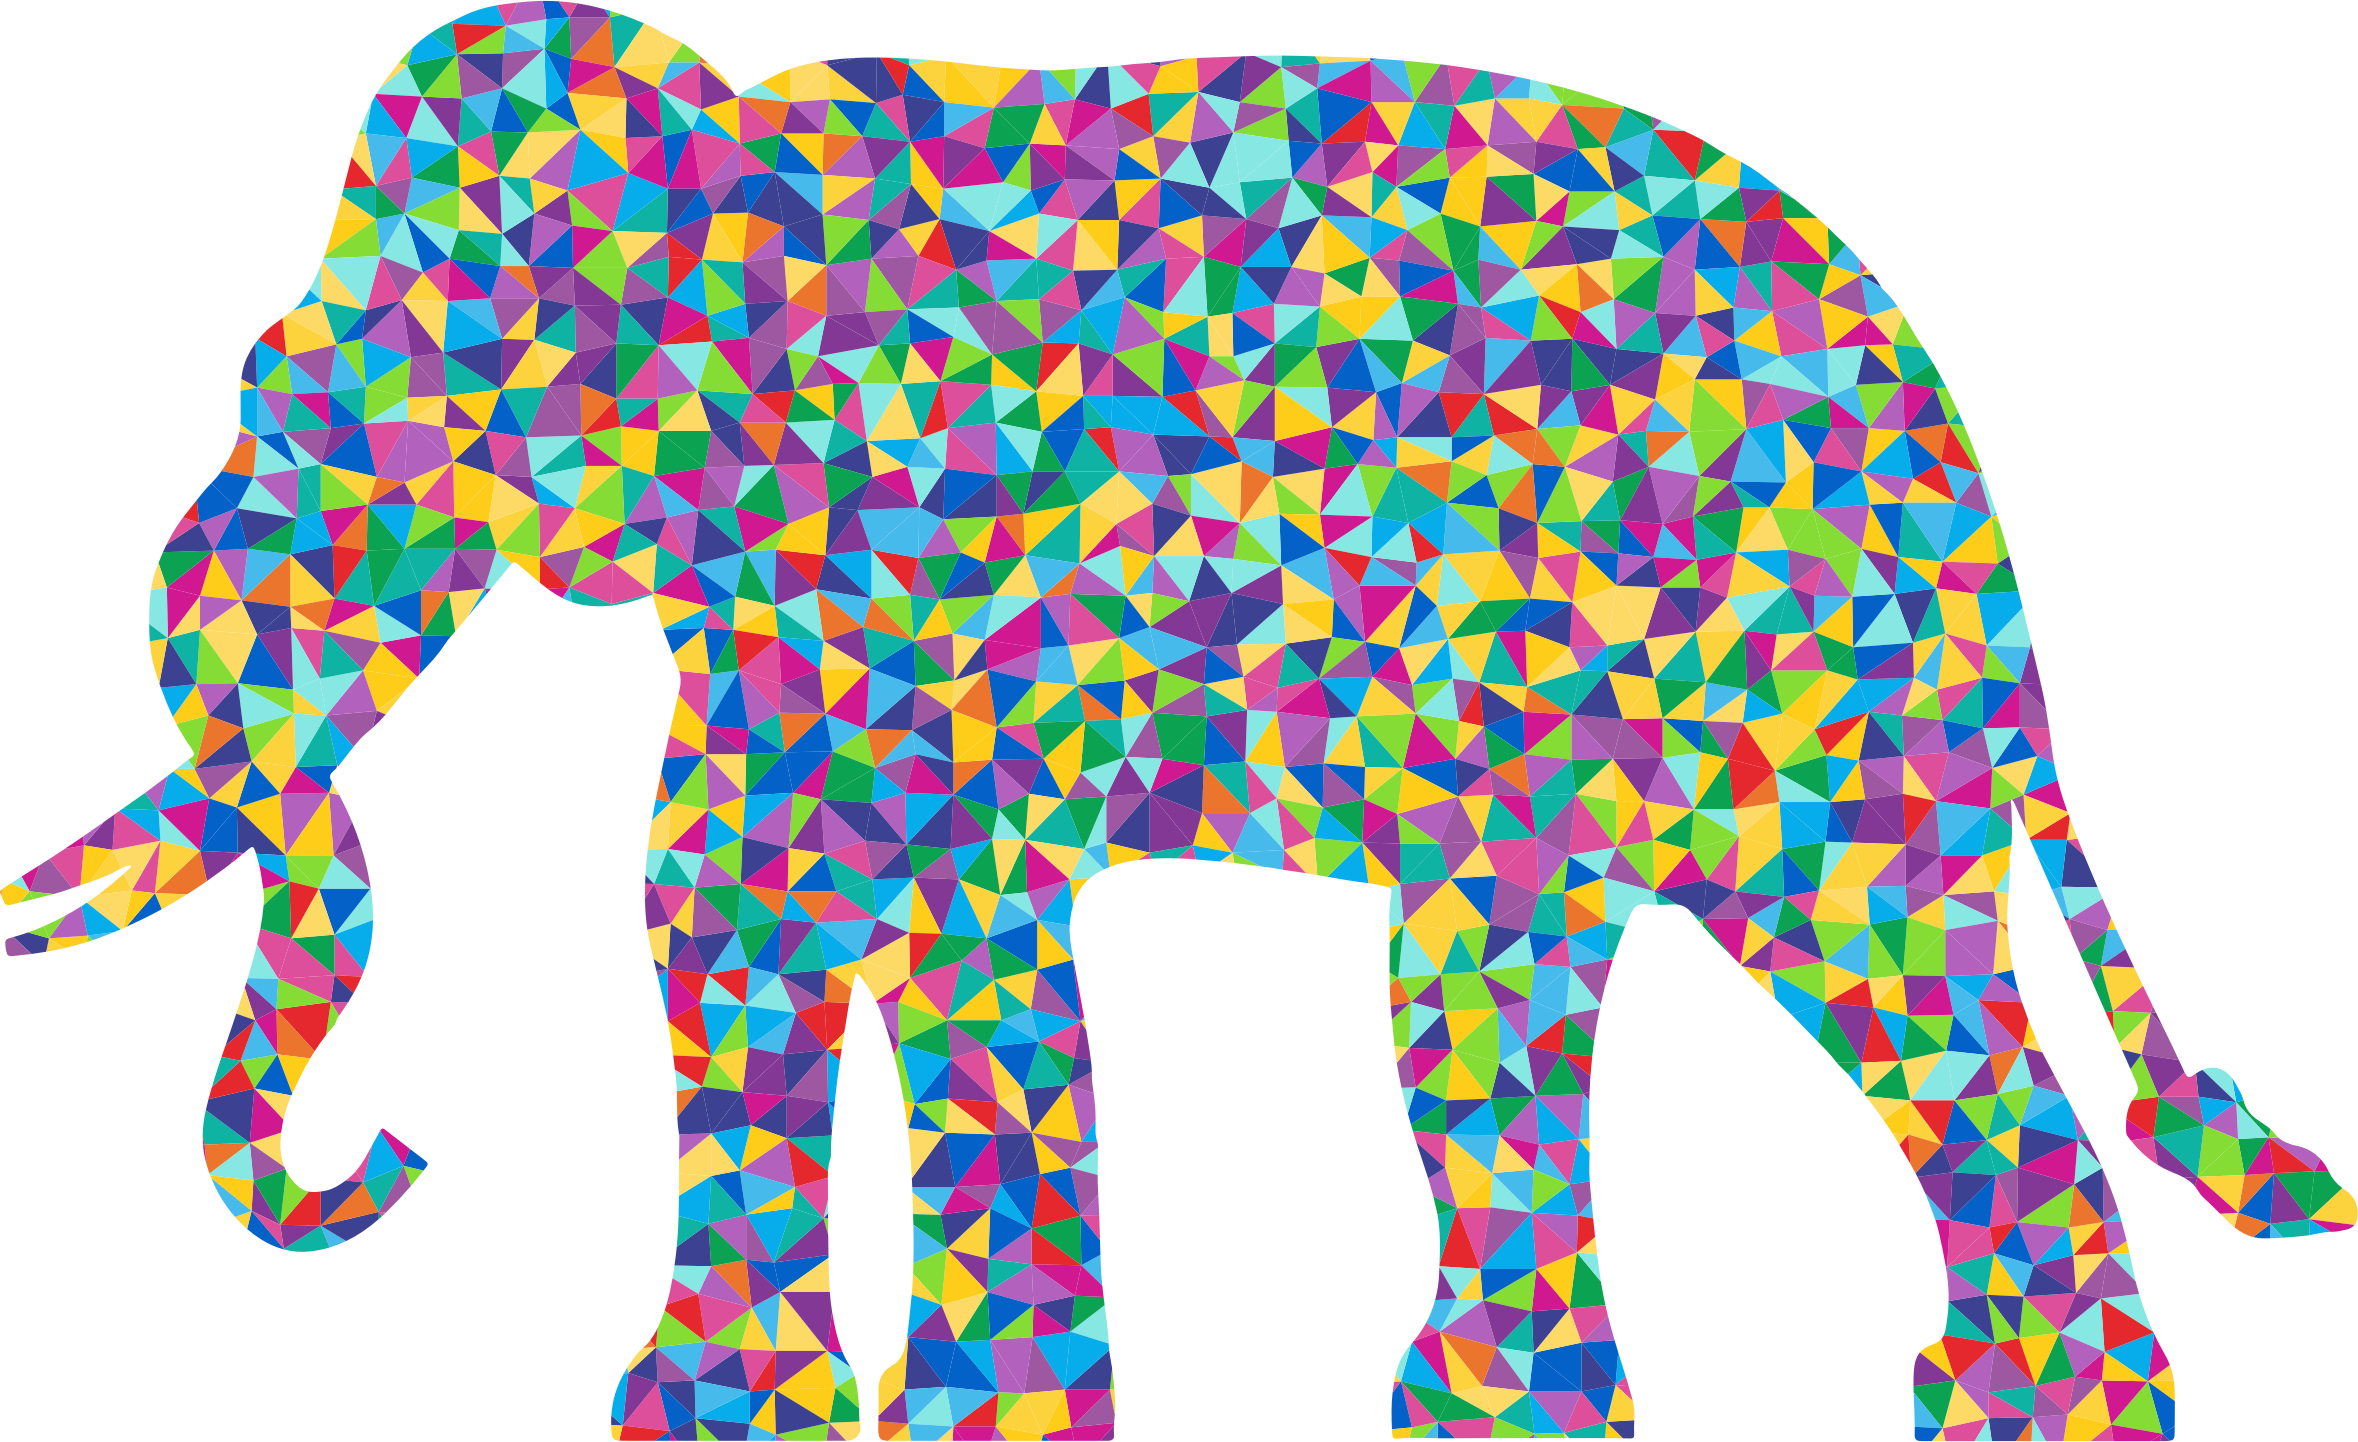 Poly Prismatic Elephant Silhouette - Poly Prismatic Elephant Silhouette (2358x1442)